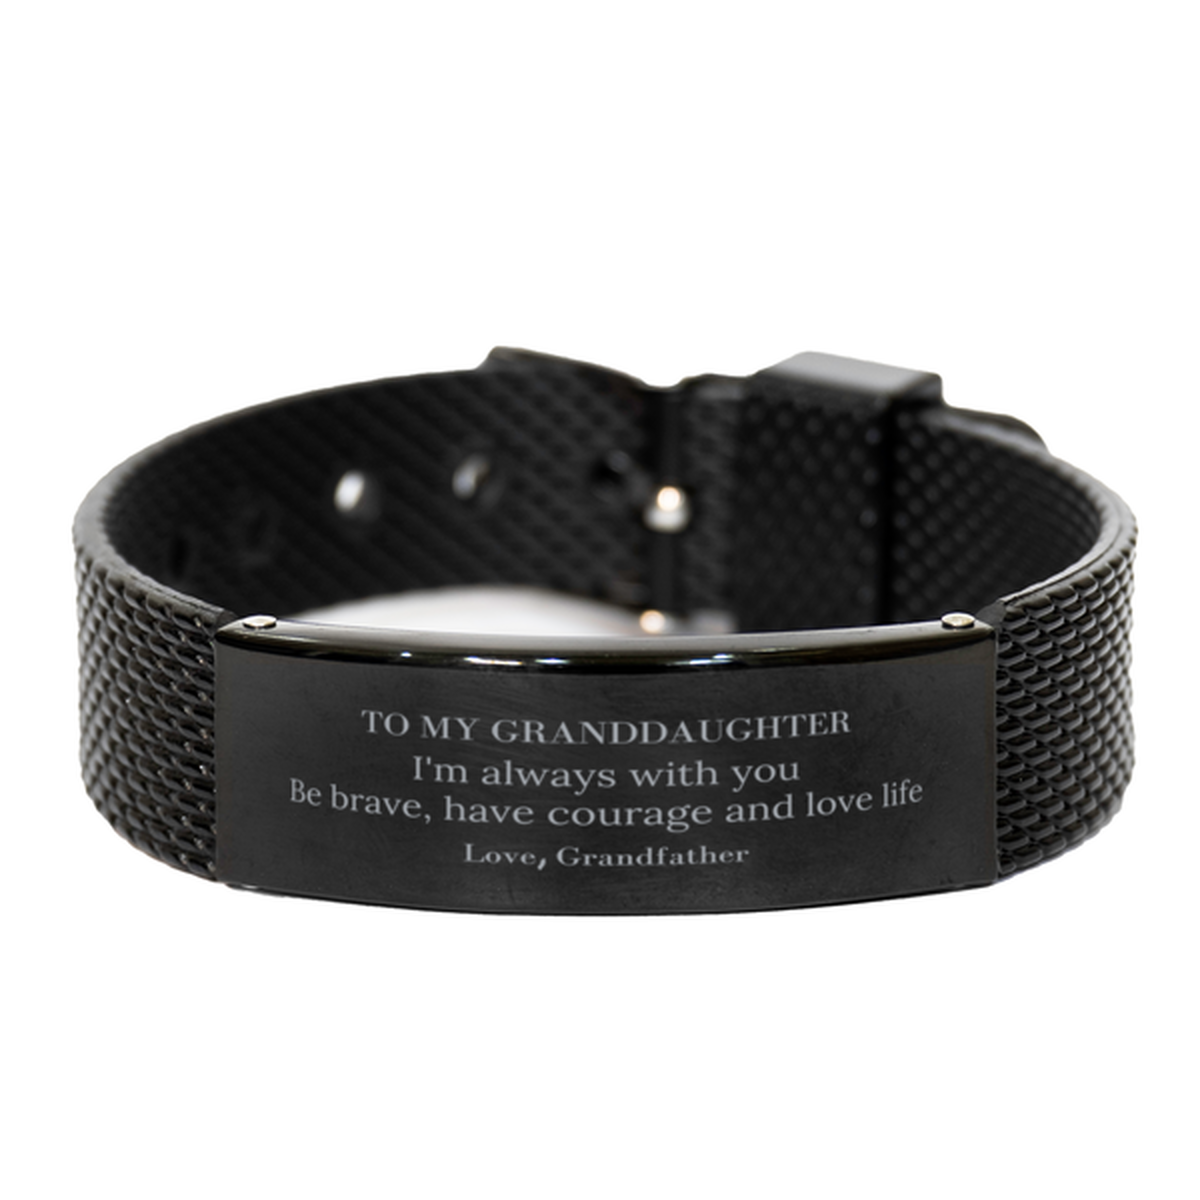 To My Granddaughter Gifts from Grandfather, Unique Black Shark Mesh Bracelet Inspirational Christmas Birthday Graduation Gifts for Granddaughter I'm always with you. Be brave, have courage and love life. Love, Grandfather